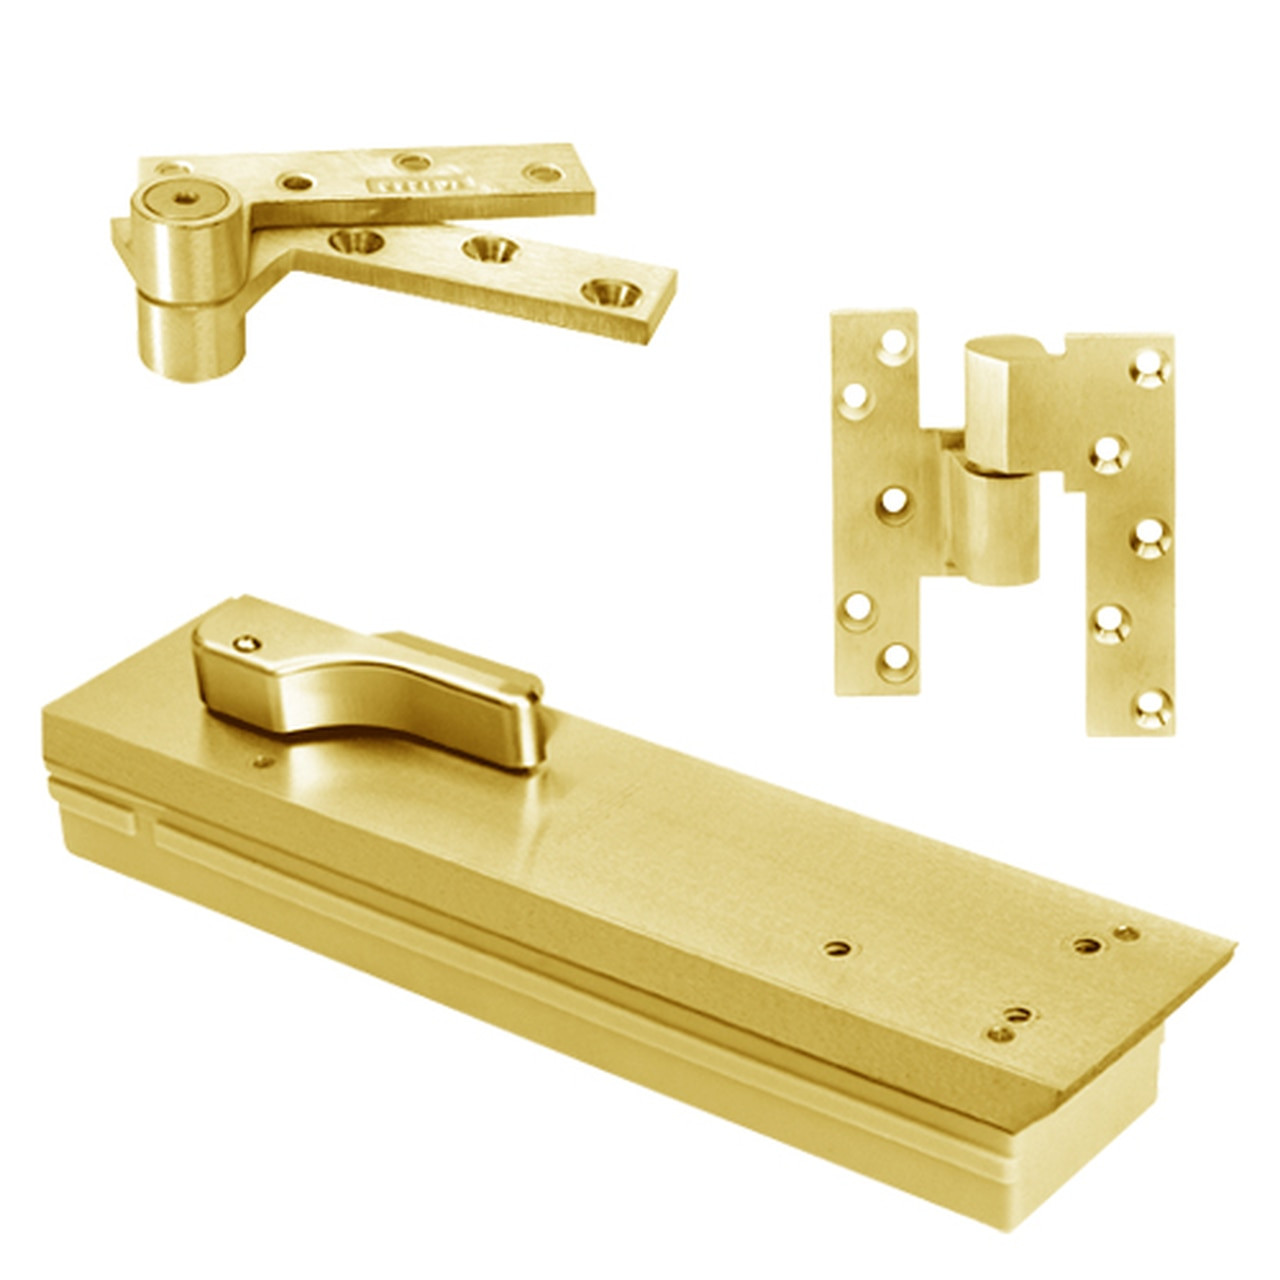 FQ5103NBC-SC-LH-605 Rixson Q51 Series Fire Rated 3/4" Offset Hung Shallow Depth Floor Closers in Bright Brass Finish